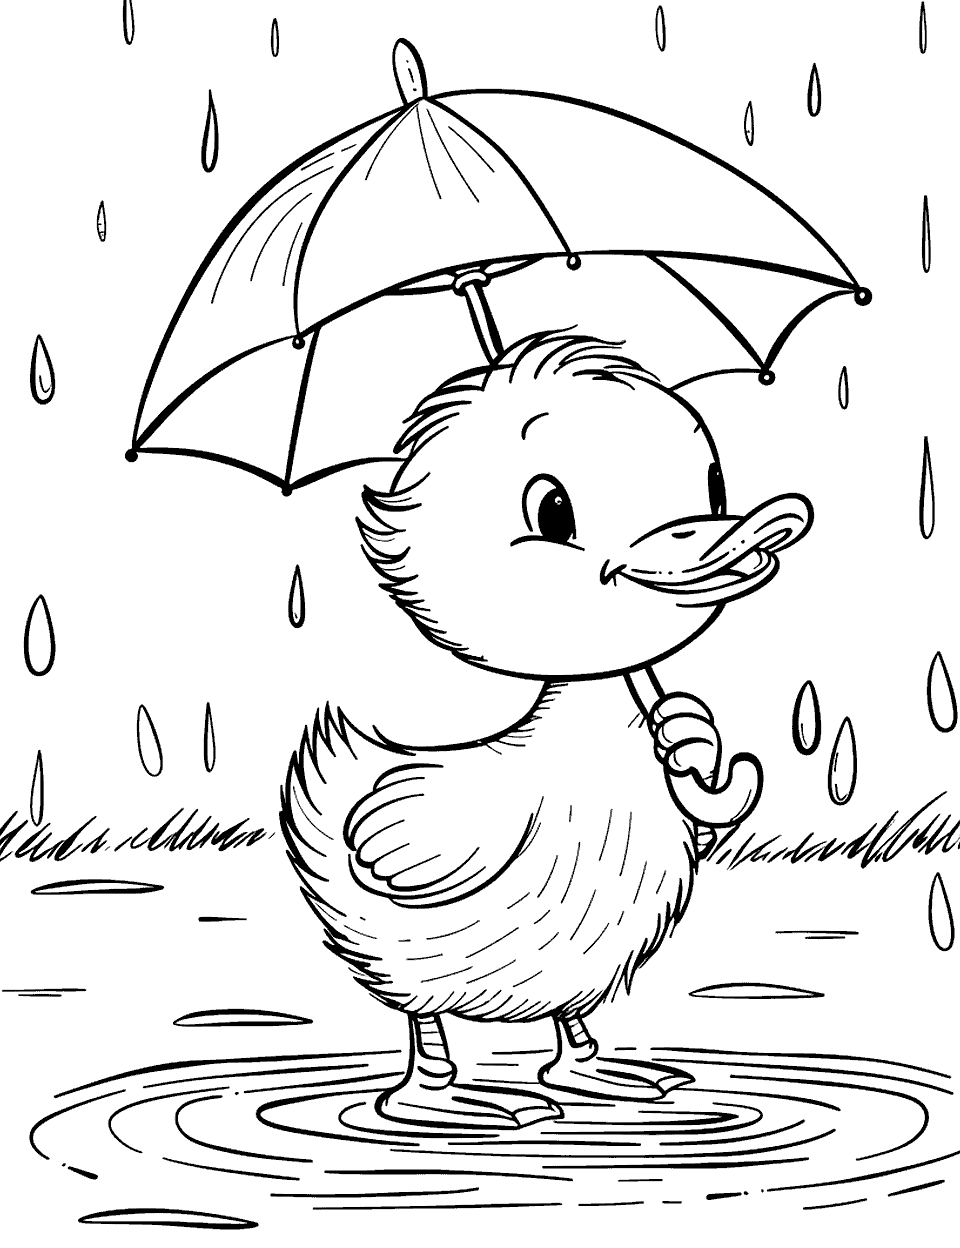 Duck with Umbrella in the Rain Coloring Page - A duck holding an umbrella, walking through the rain with a puddle at its feet.